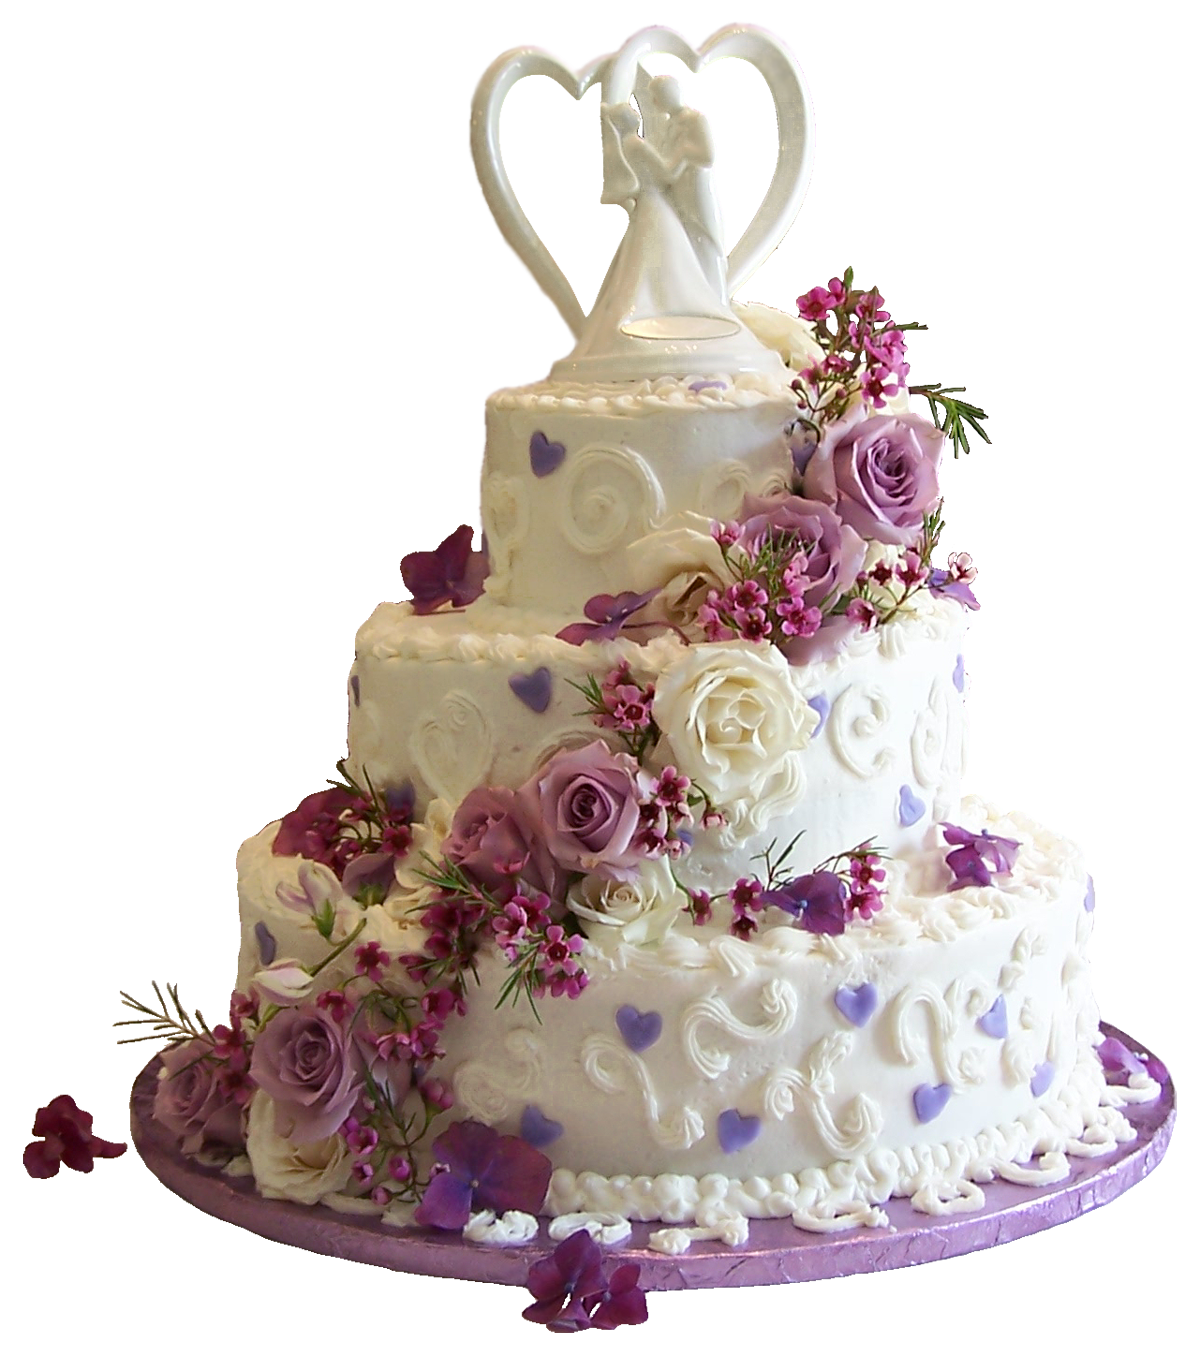 Share 79+ transparent cake png - awesomeenglish.edu.vn